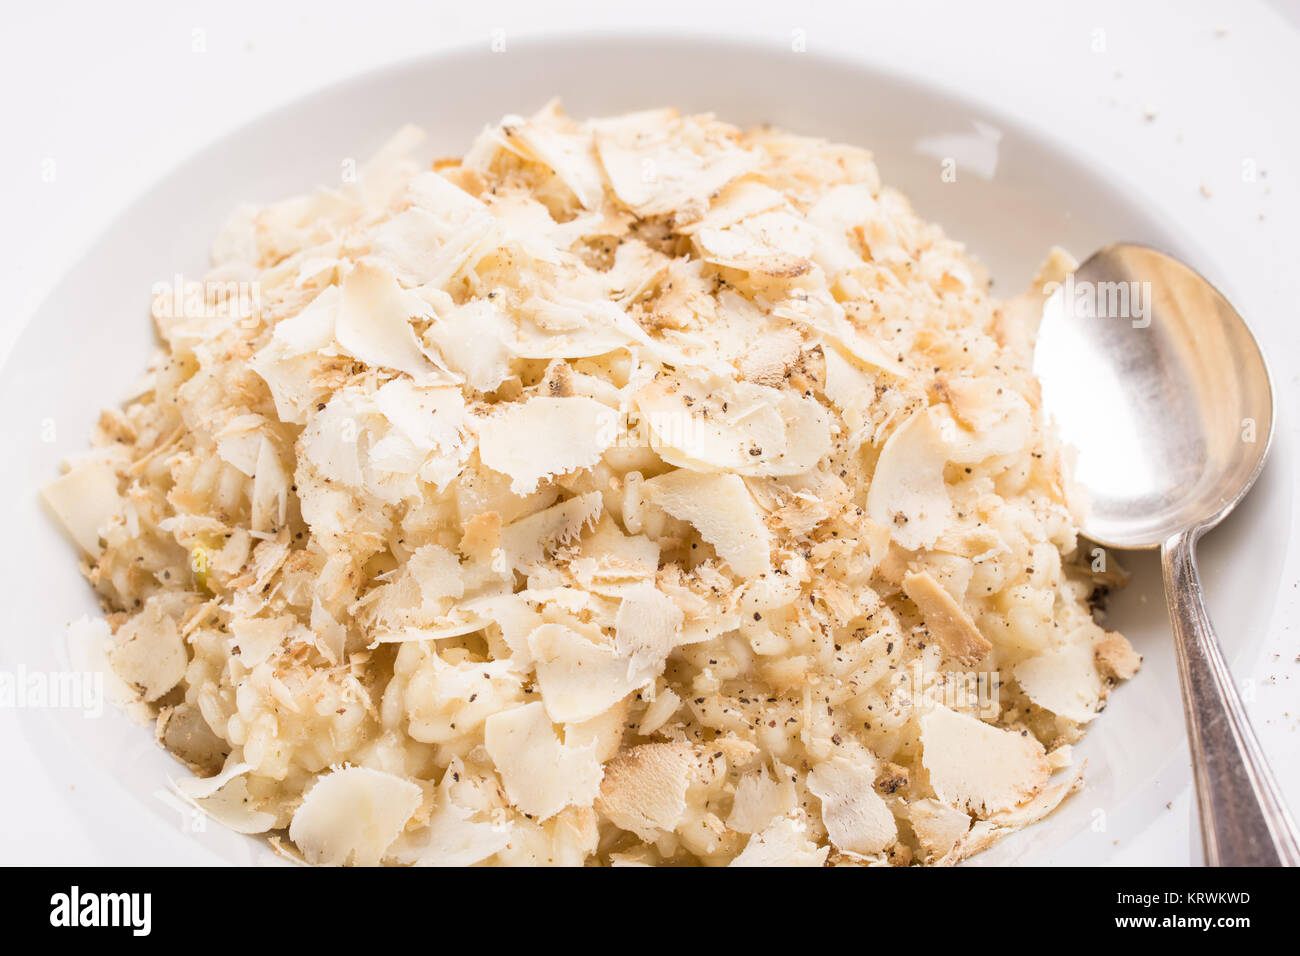 grated cheese on risotto rice Stock Photo